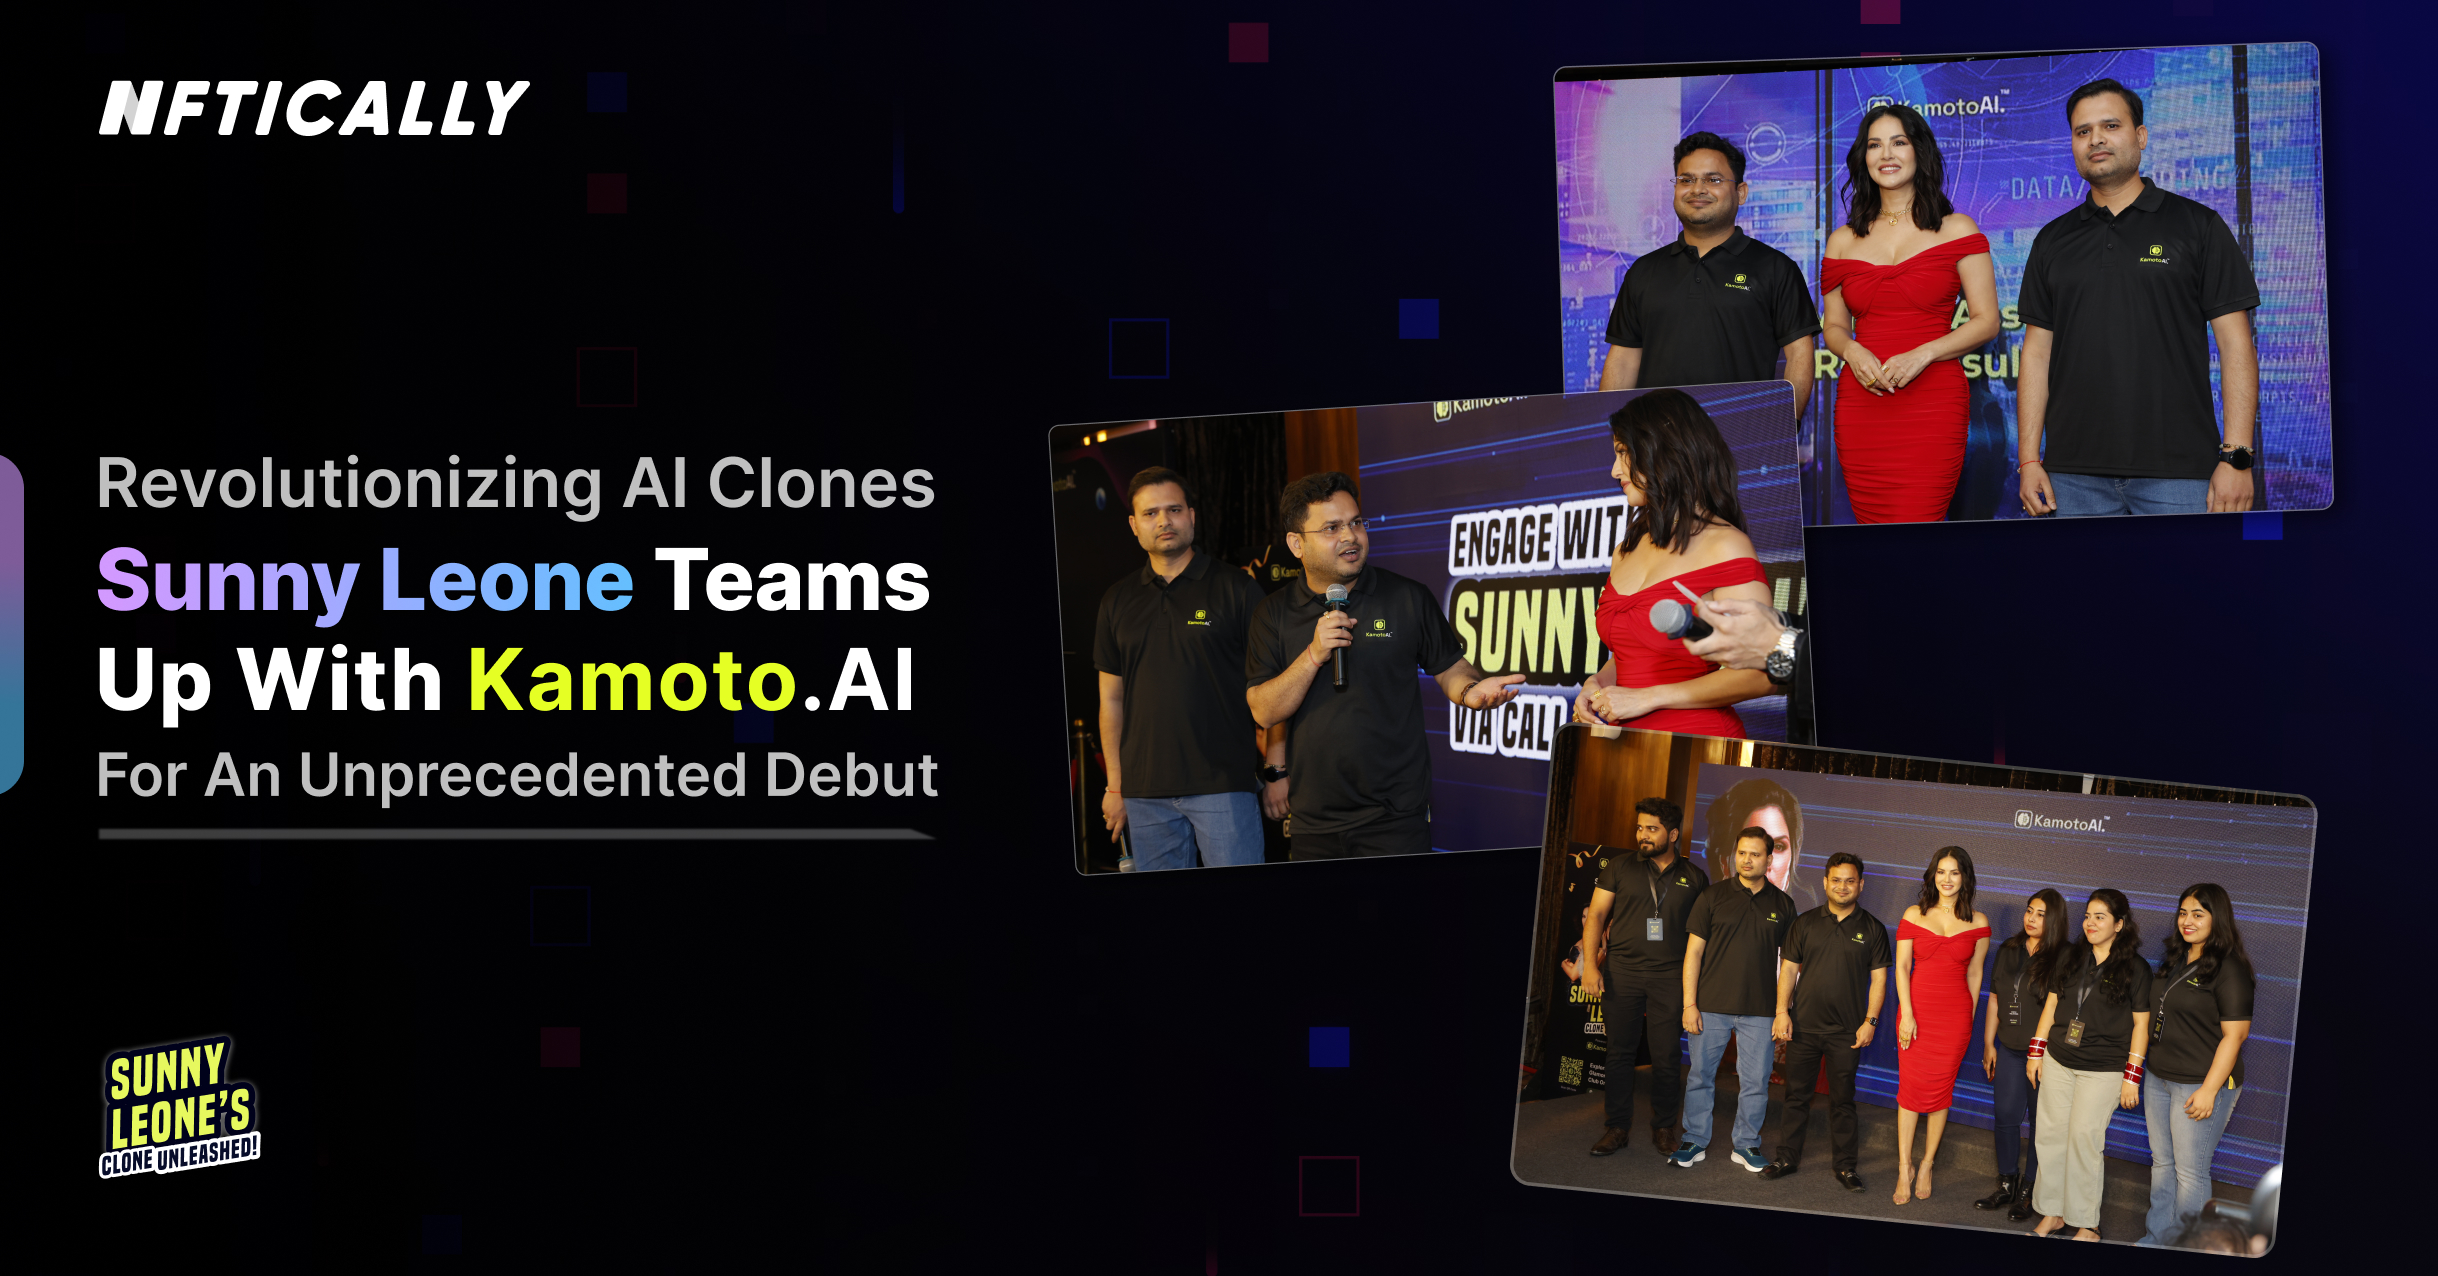 Revolutionizing AI Clones: Sunny Leone Teams Up with Kamoto.AI for an Unprecedented Debut